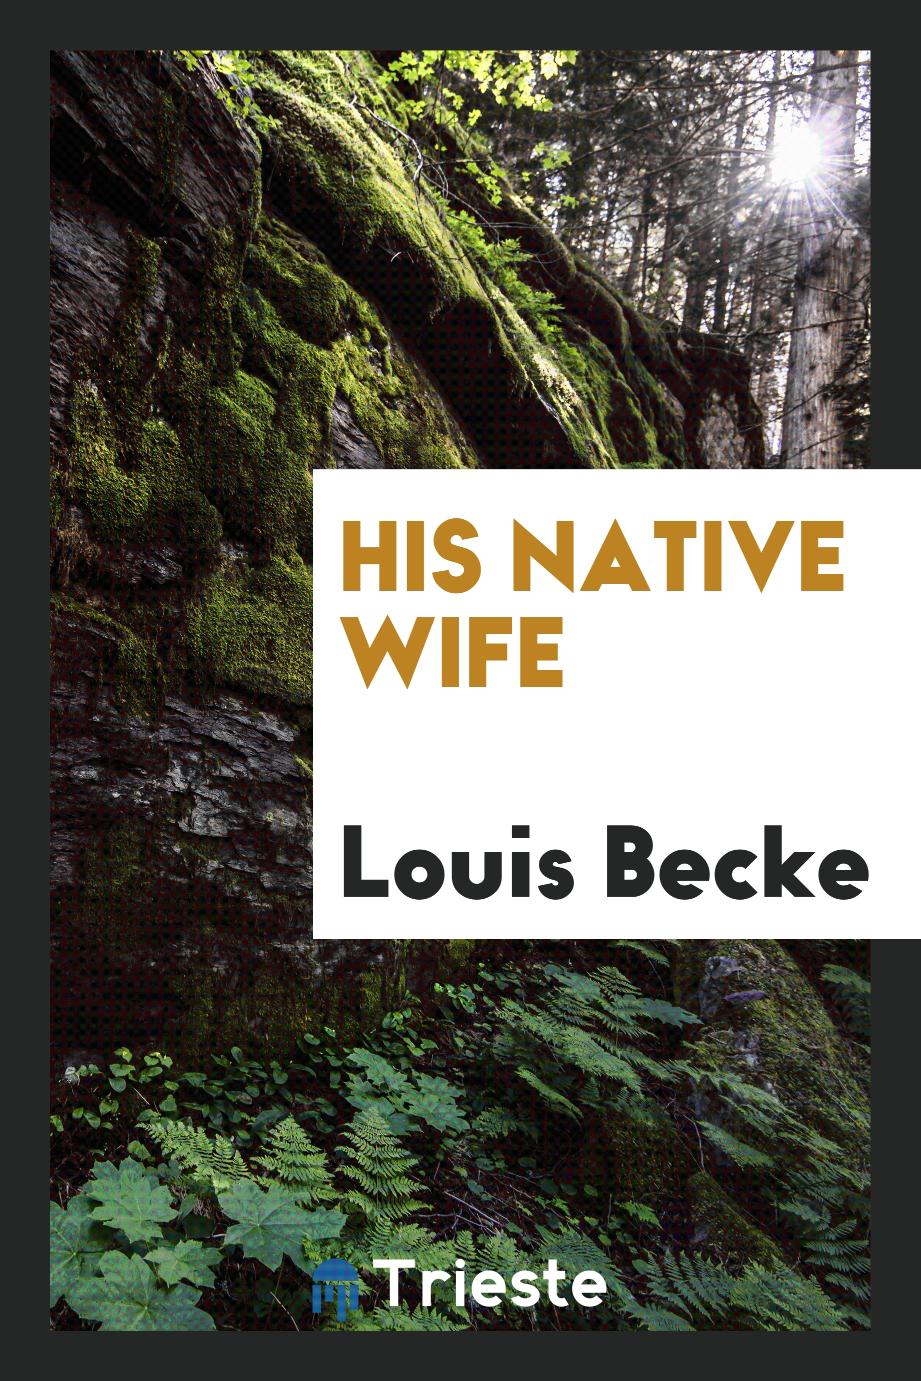 His native wife